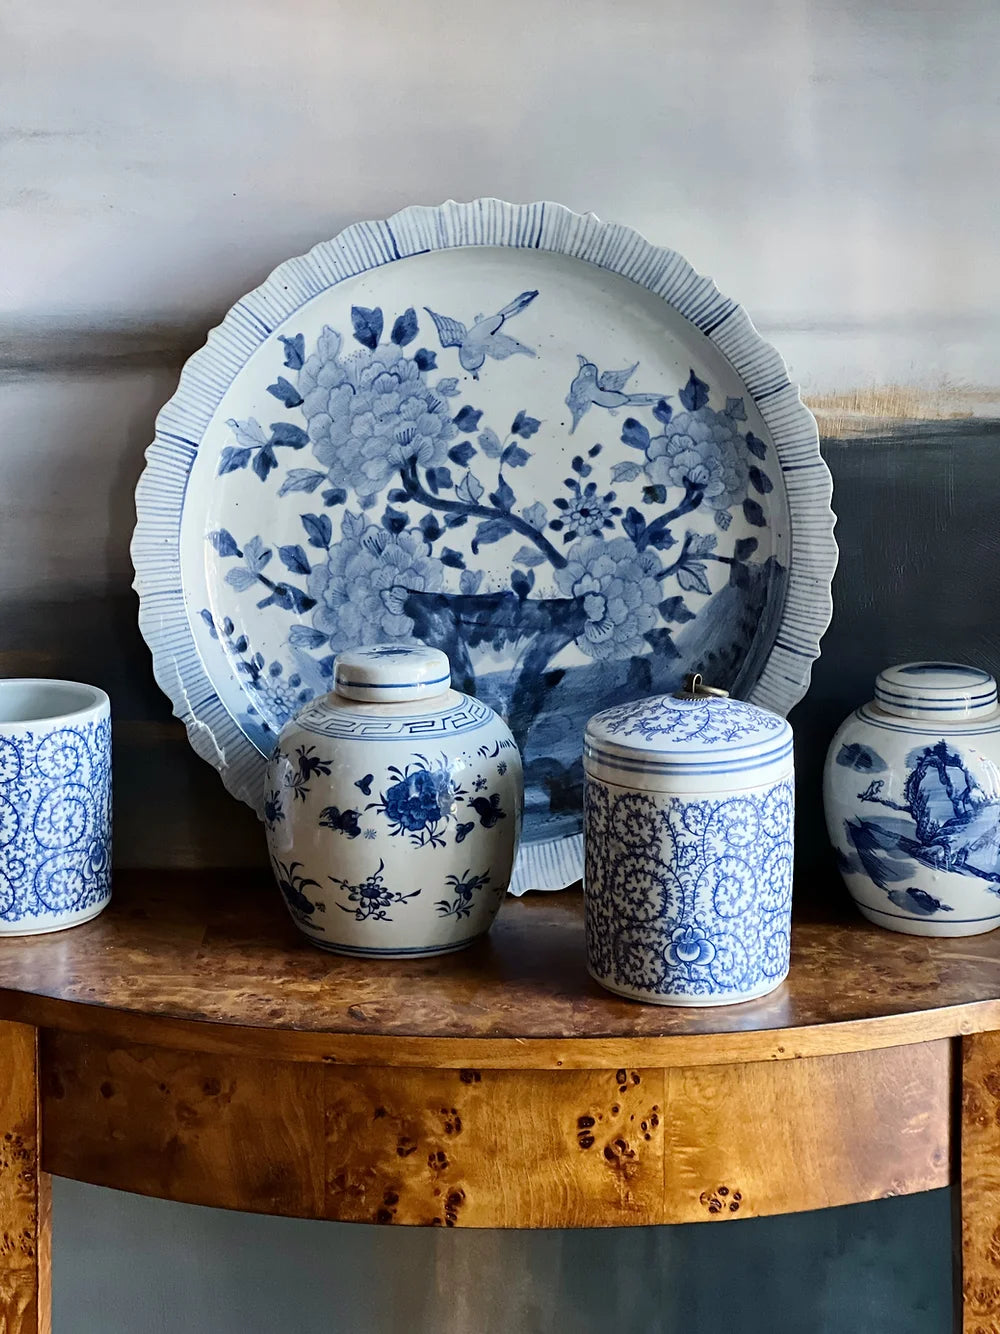 blue and white collection of ginger jars, tea jars, platters and orchid pots